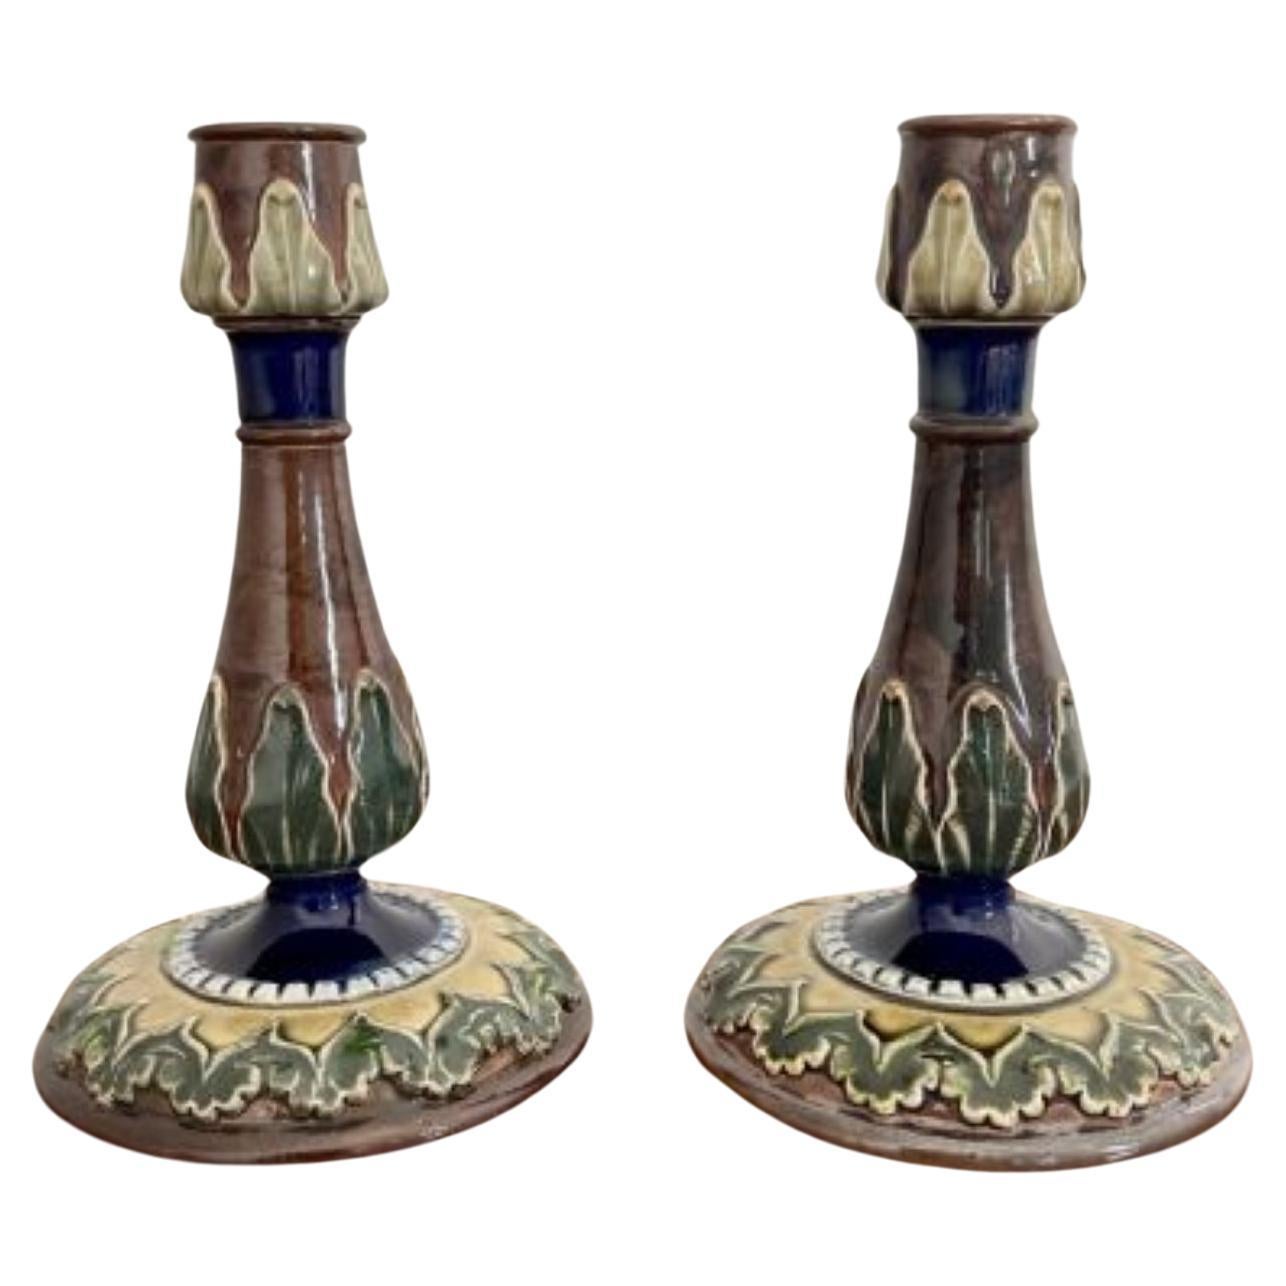 Attractive pair of antique Royal Doulton candlesticks 